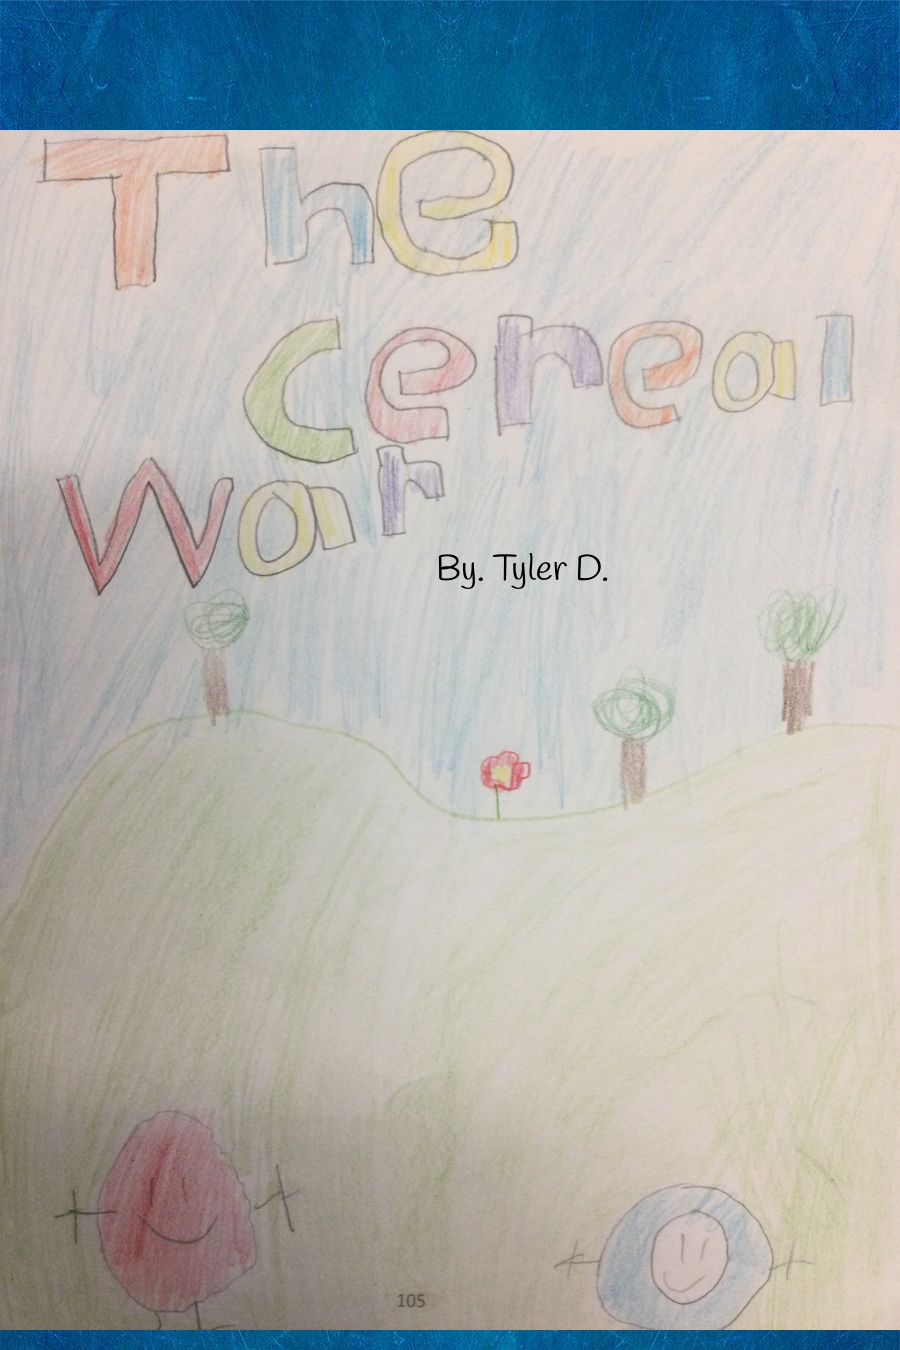 The Cereal War by Tyler D